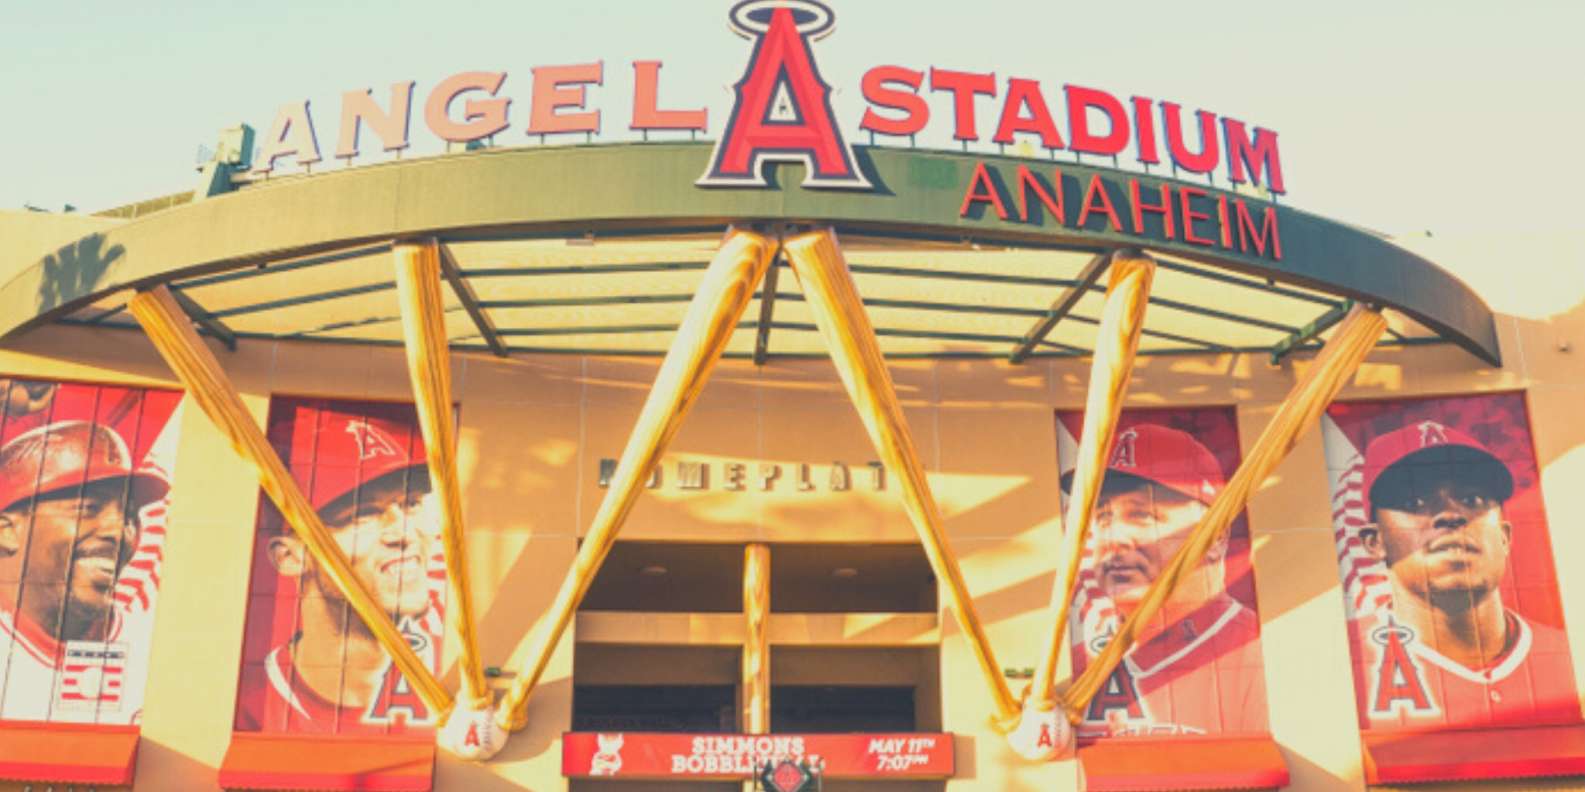 Los Angeles Angels - When you're out and about this weekend, stop by the  Angels Team Store at Angel Stadium as we continue our Warehouse Sale! Shop  big discounts on select merchandise